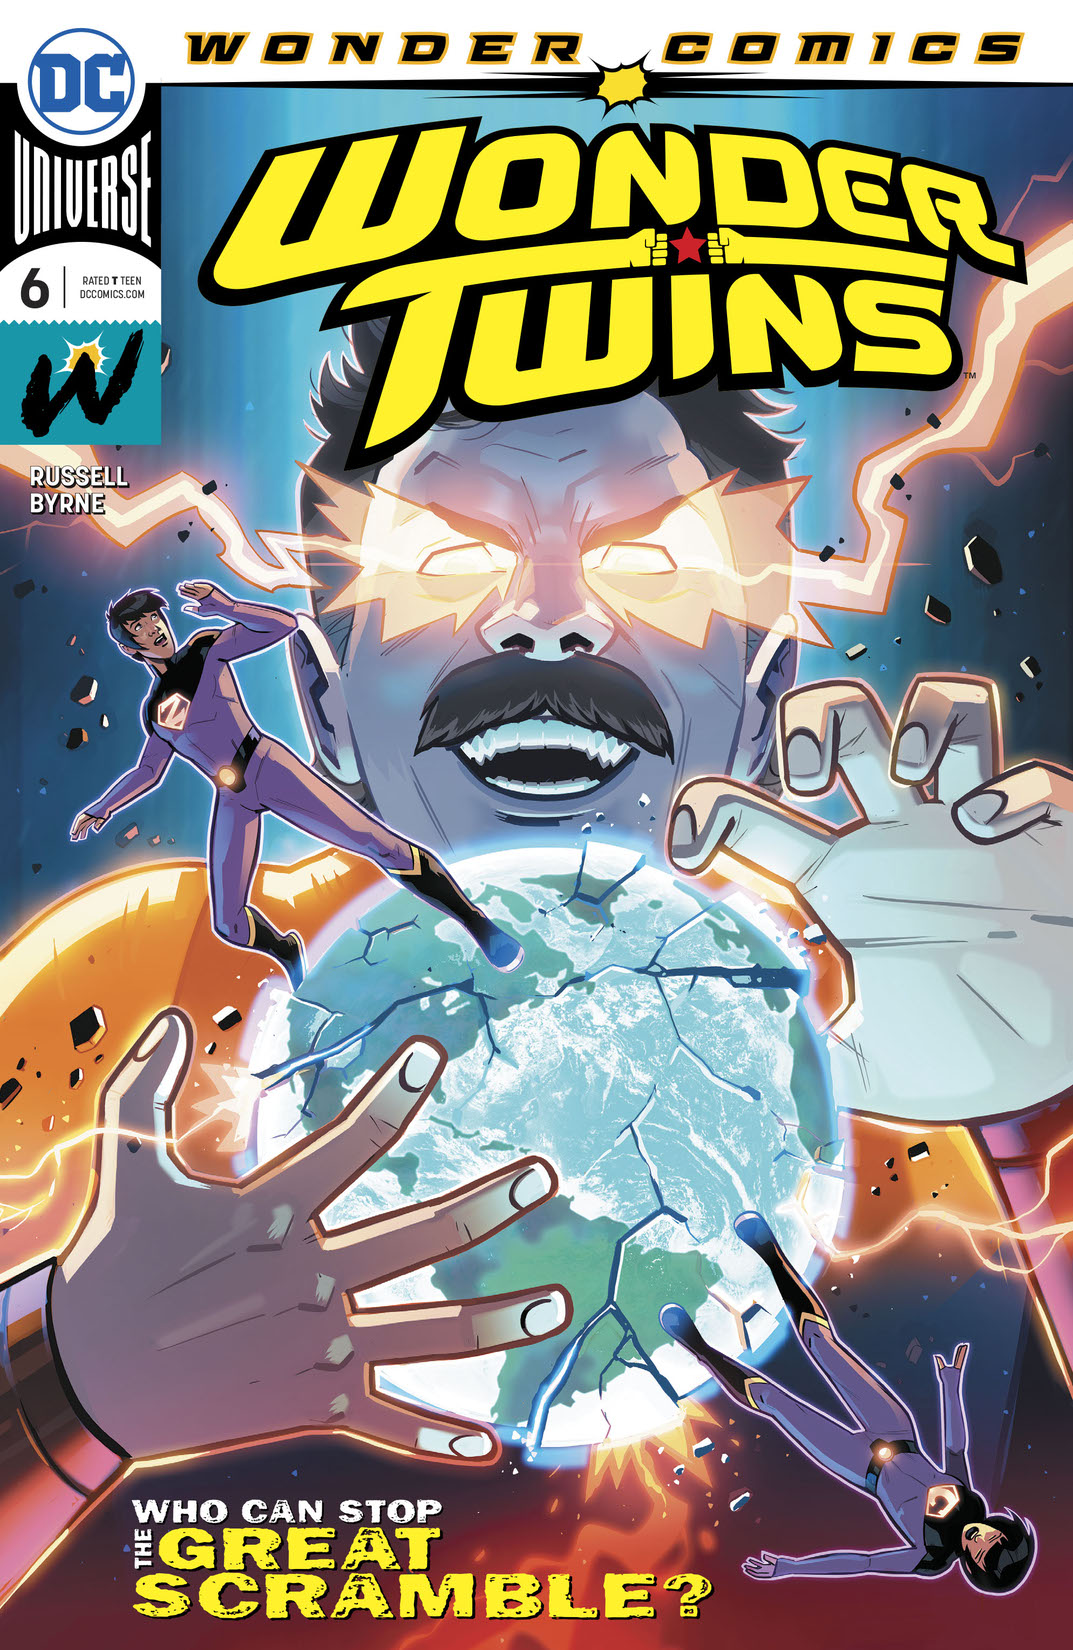 Wonder Twins #6 preview images